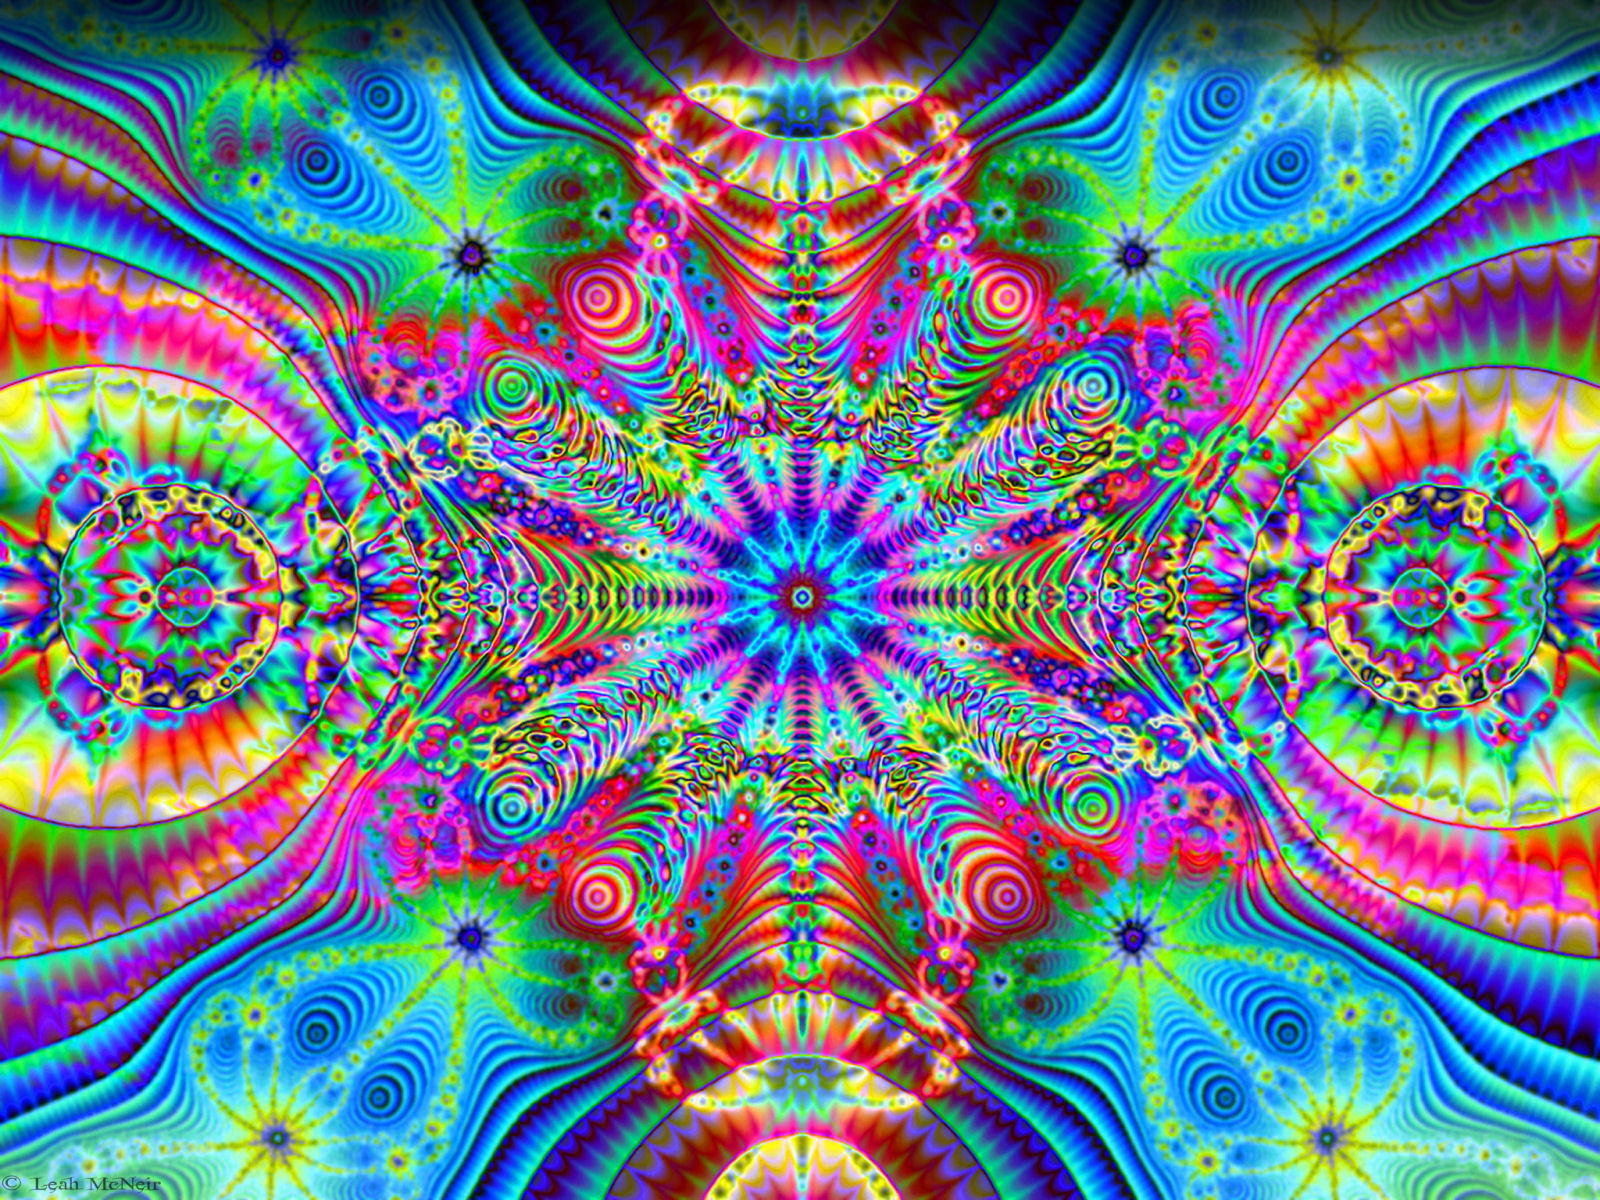 trippy backgrounds for twitter